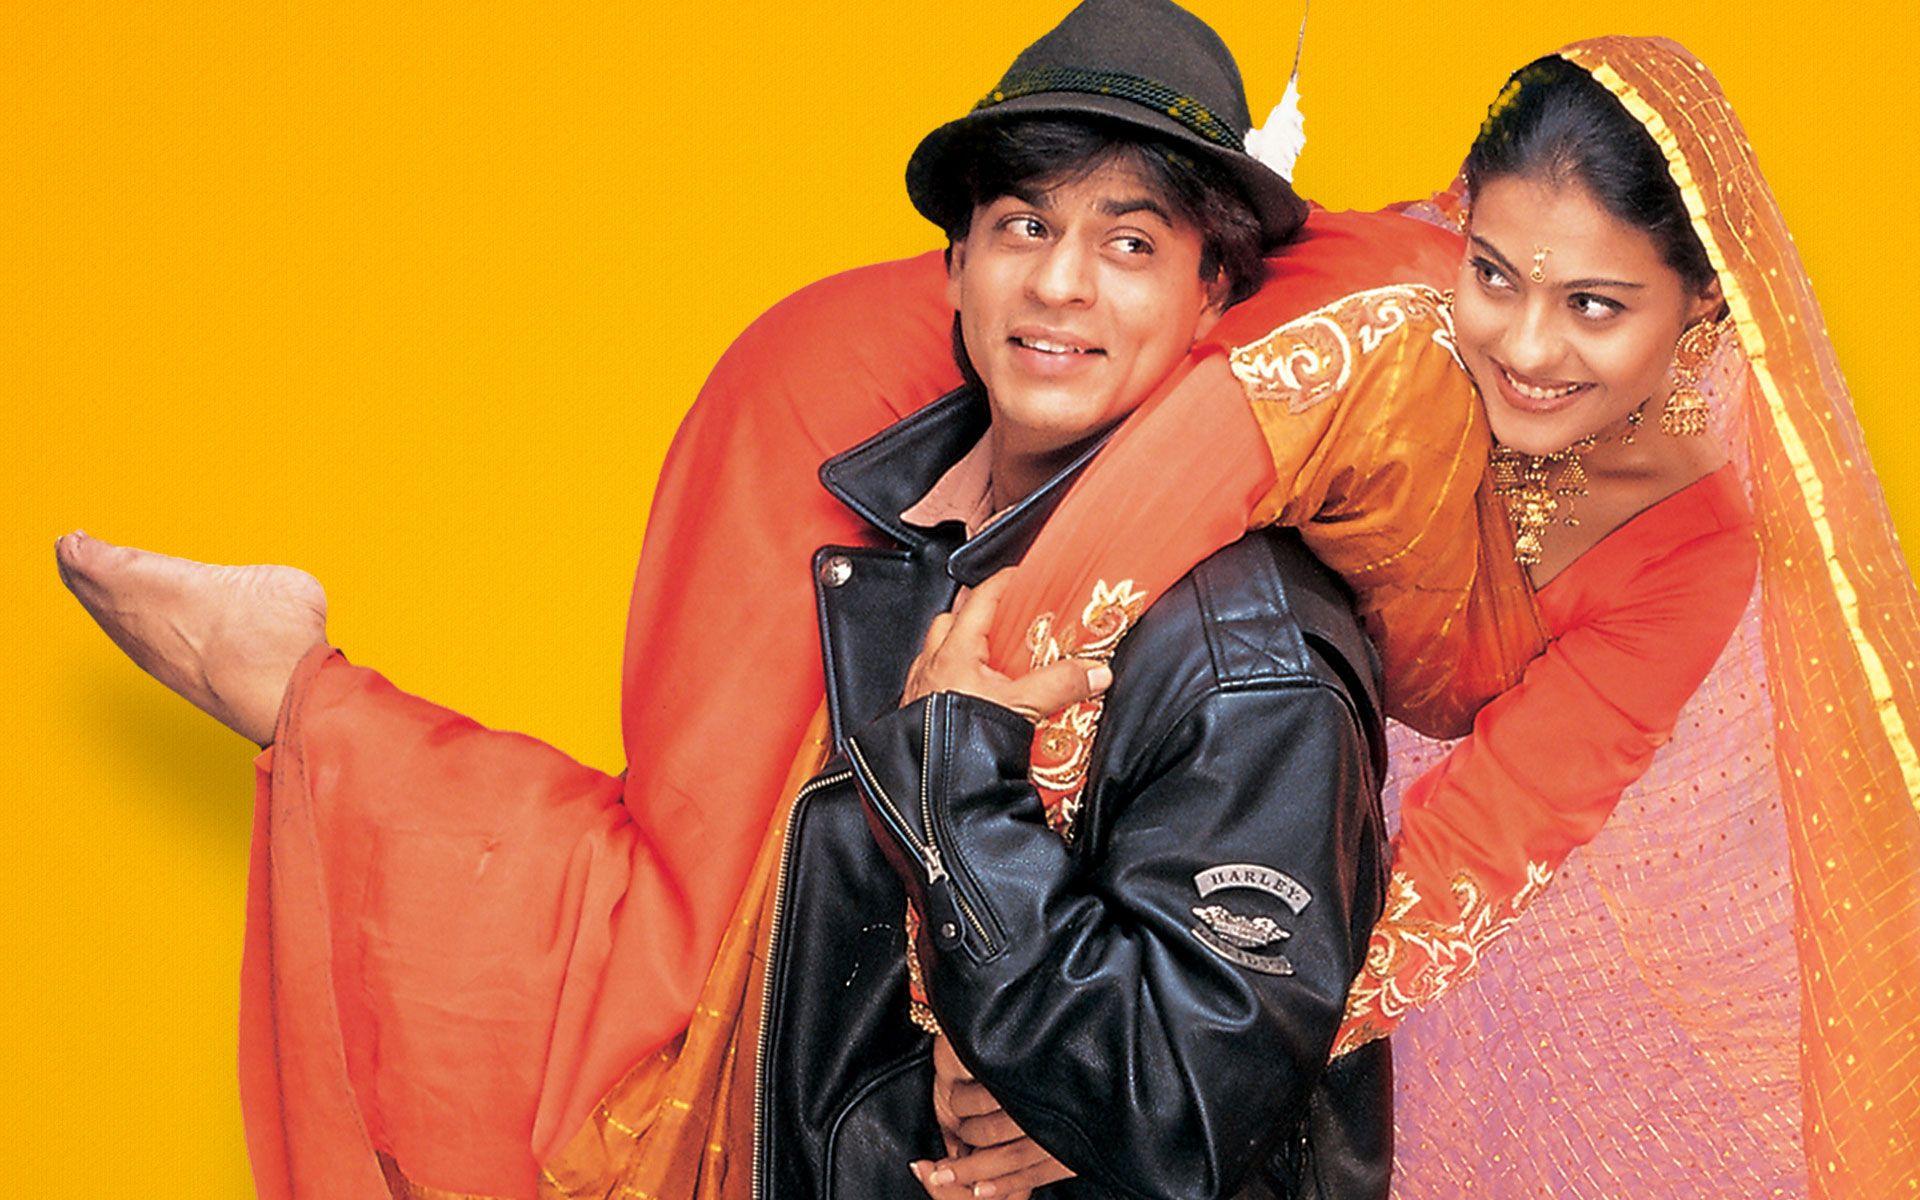 dilwale dulhania le jayenge full movie download for mobile